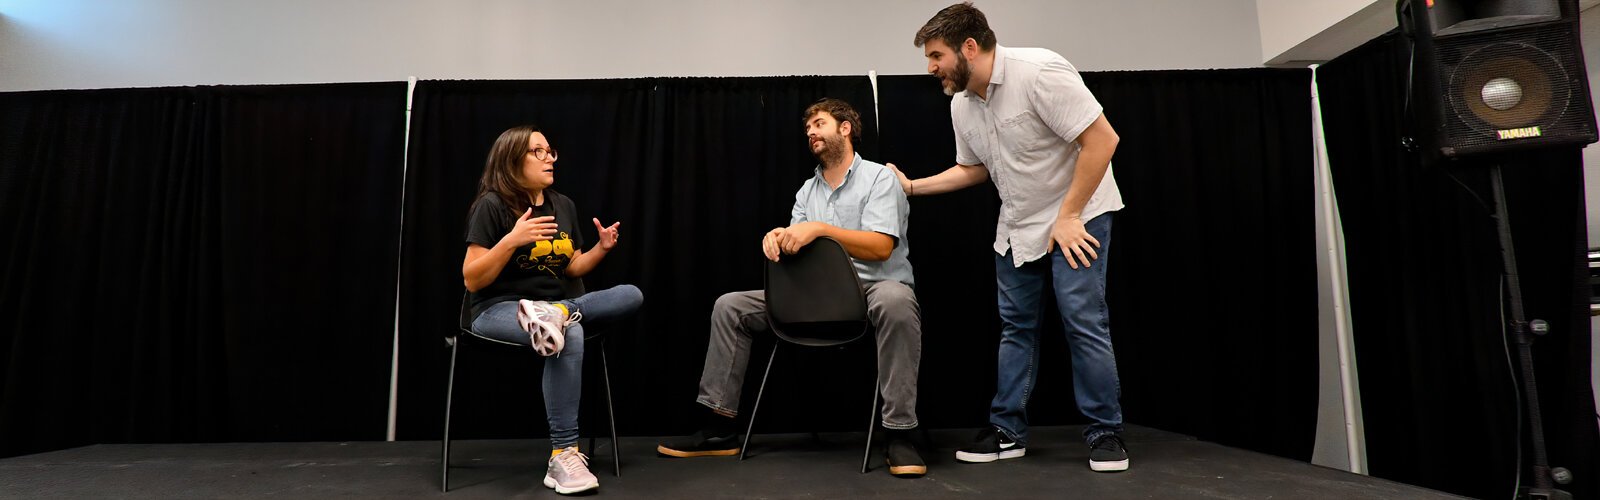 Kelly, Matt and Anthony, of the Countdown Improv Festival, perform for each other and the audience as they turn audience suggestions into hilarious scenes in Studio 2 of the New Tampa Performing Arts Center.